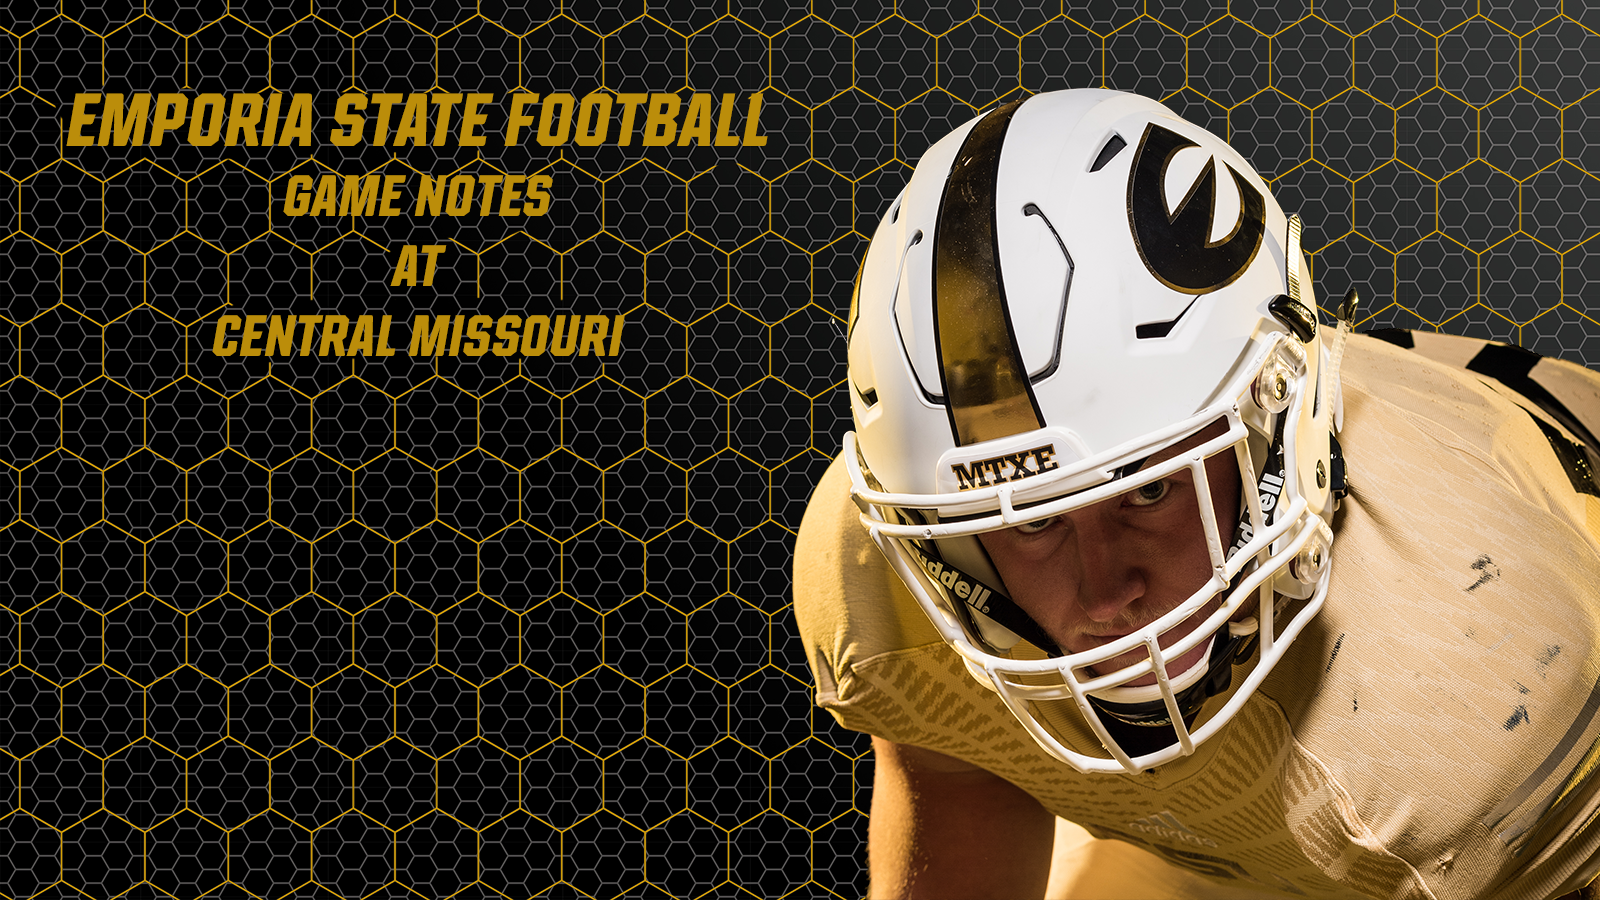 Emporia State Football Travels To Central Missouri This Weekend